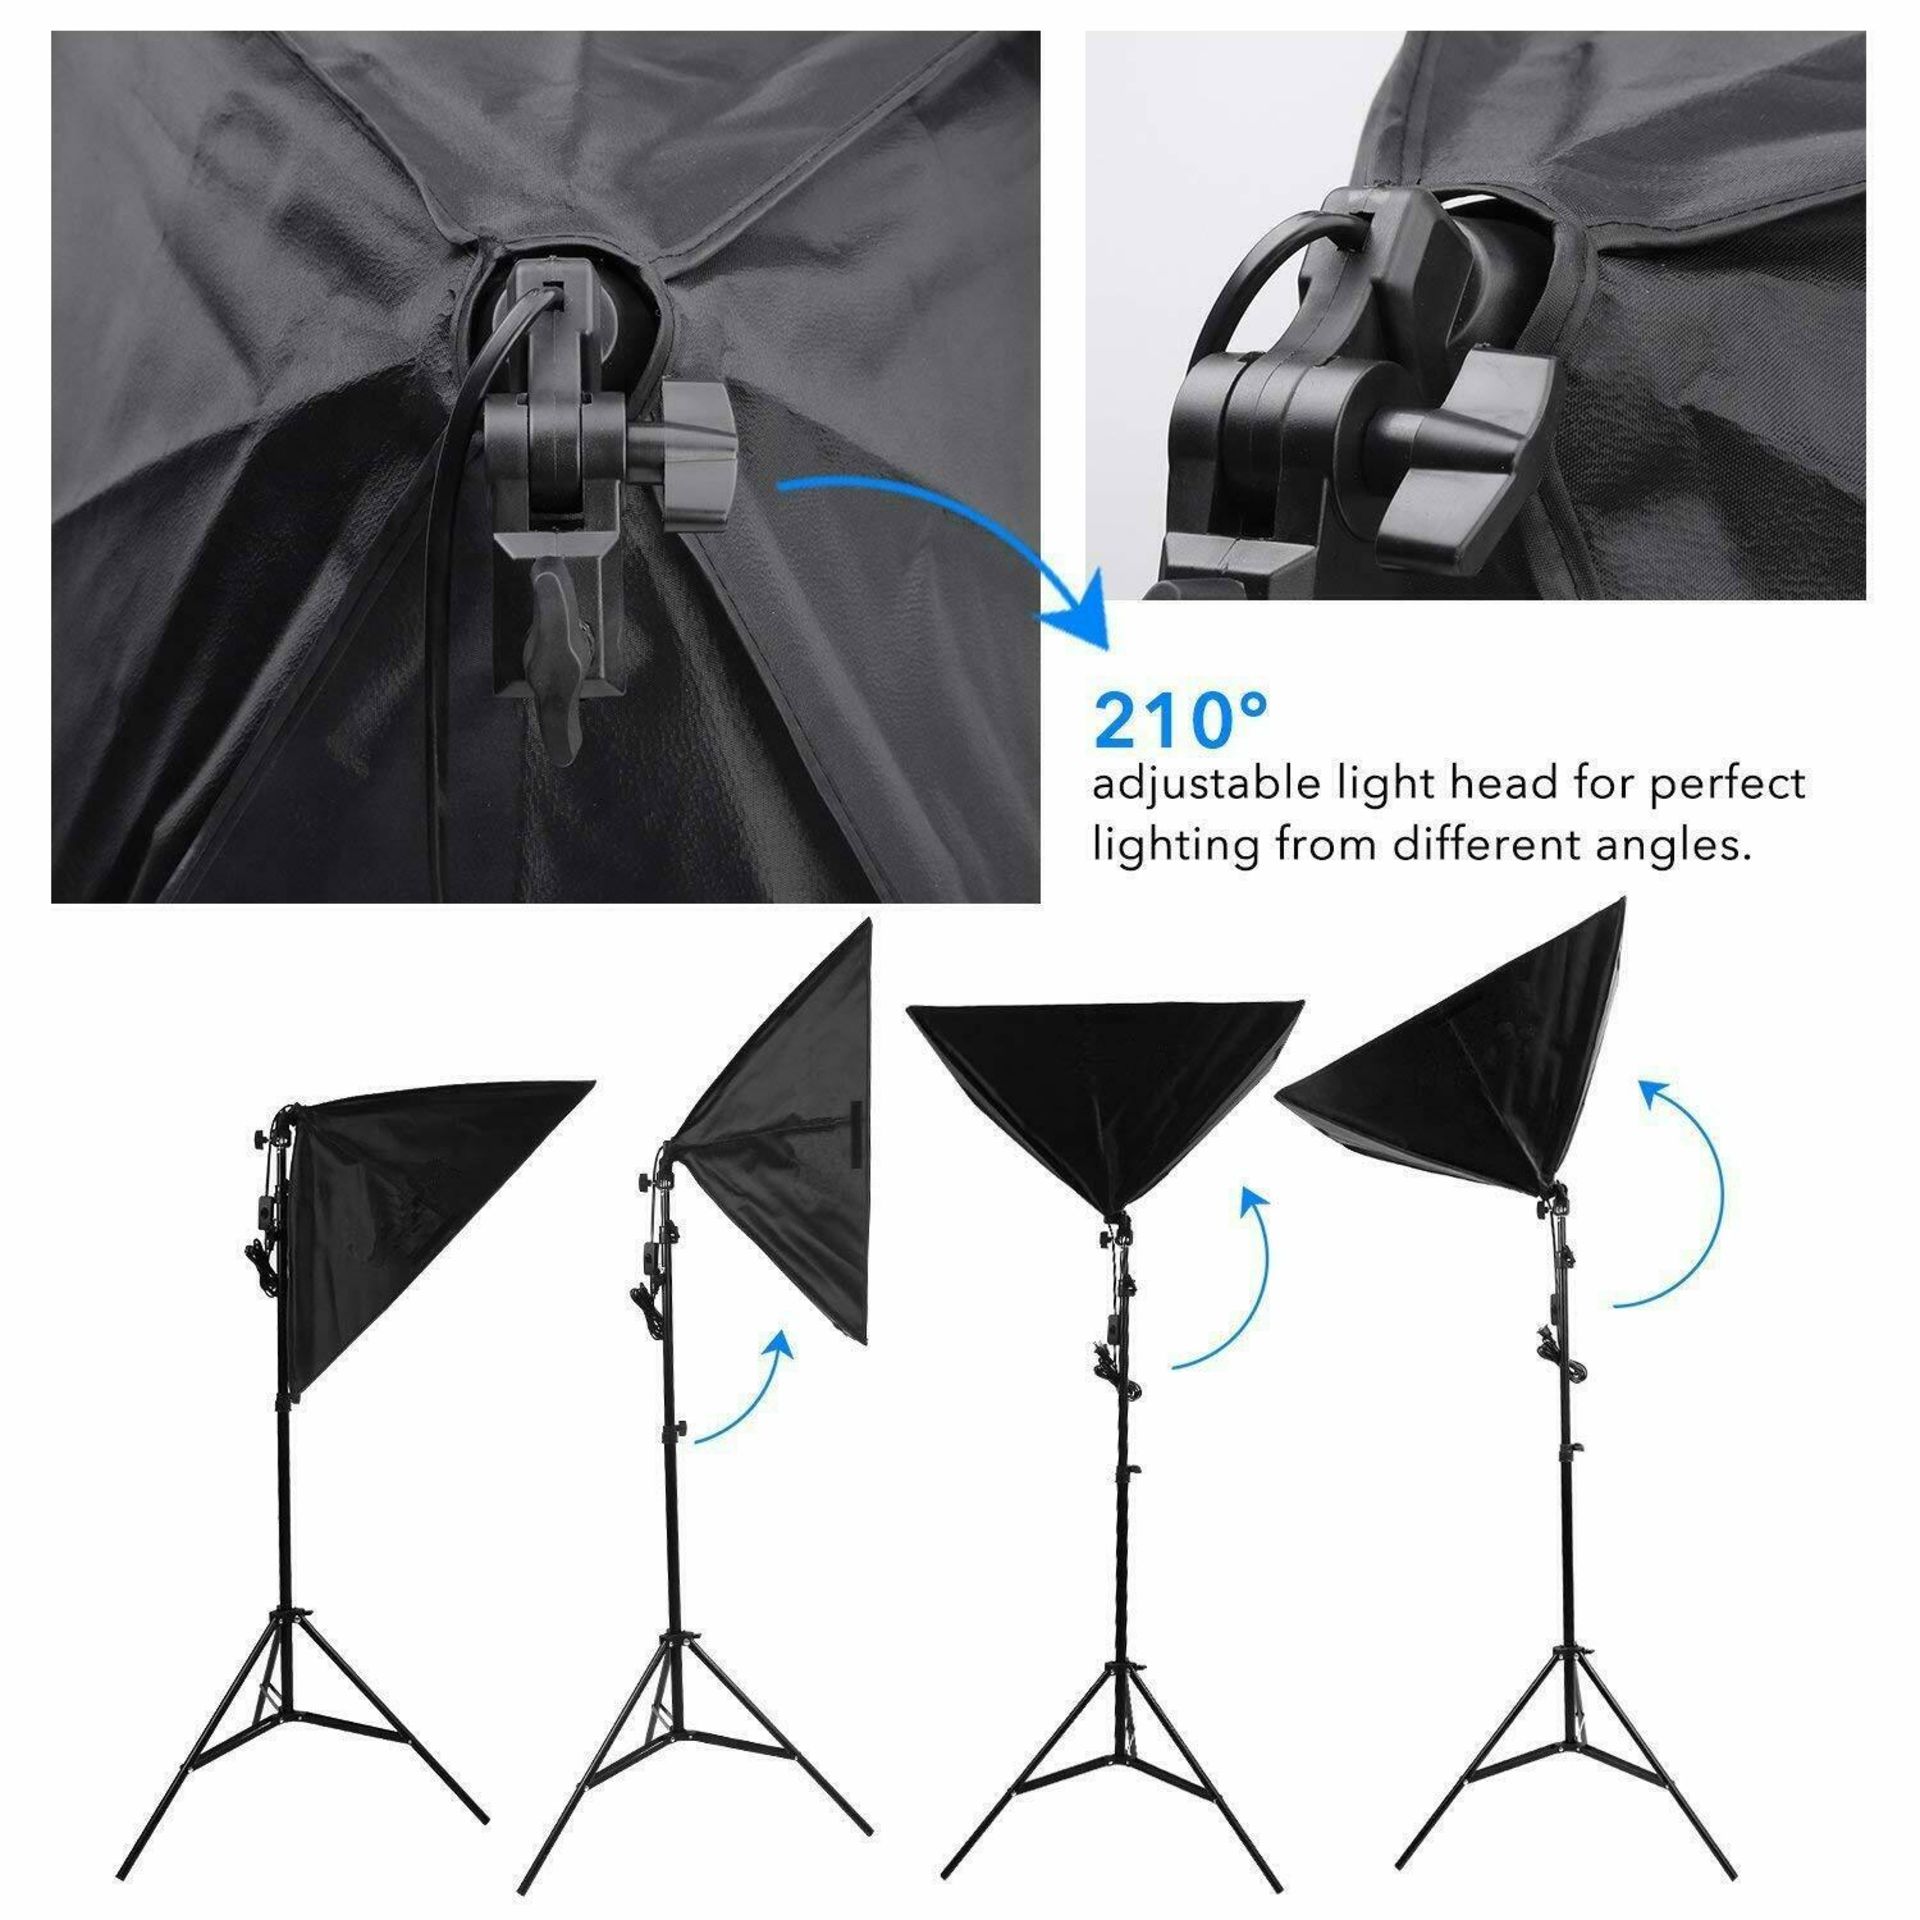 Pair of Photography Studio Continuous Lighting Softbox Light Kit with stand - Image 2 of 3